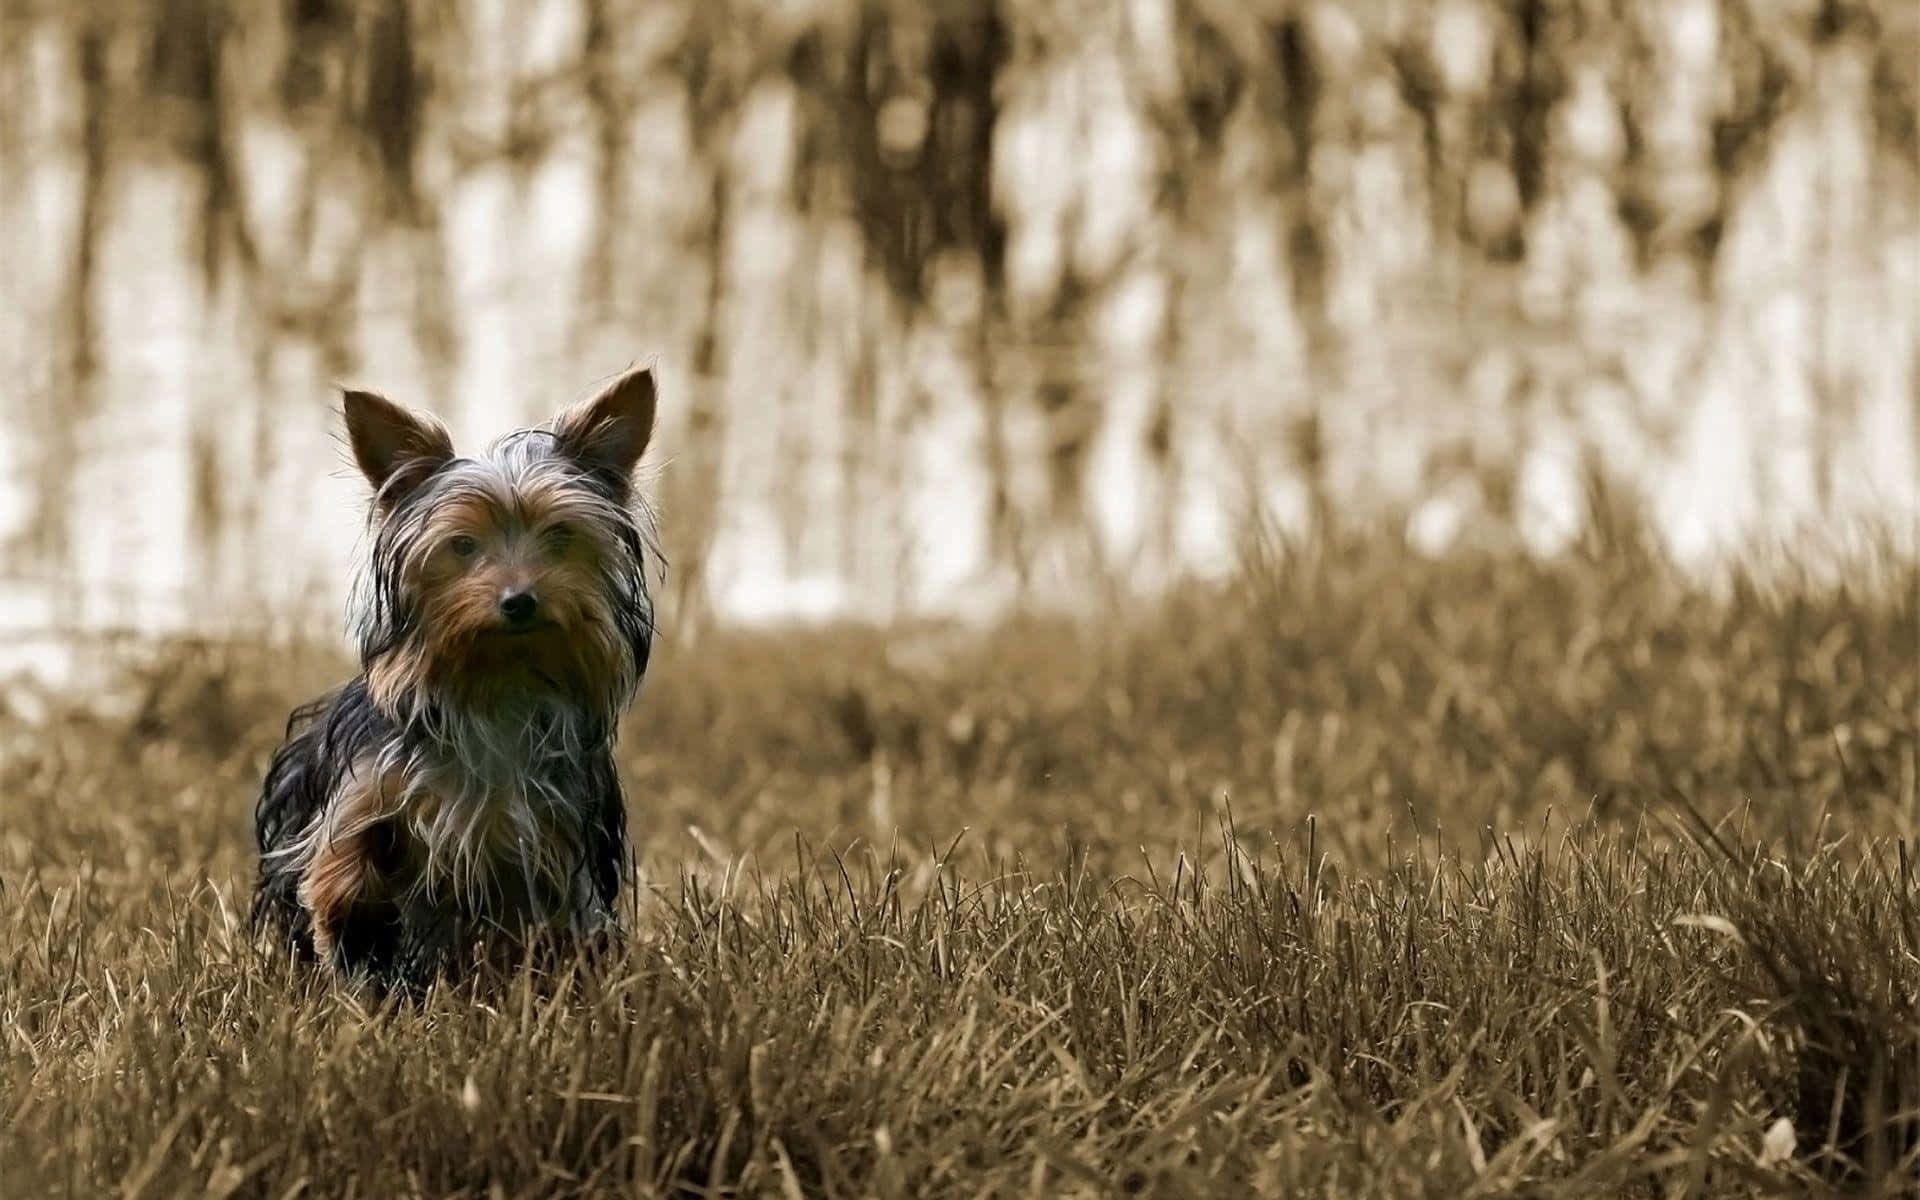 Adorable Yorkshire Terrier posing outdoors